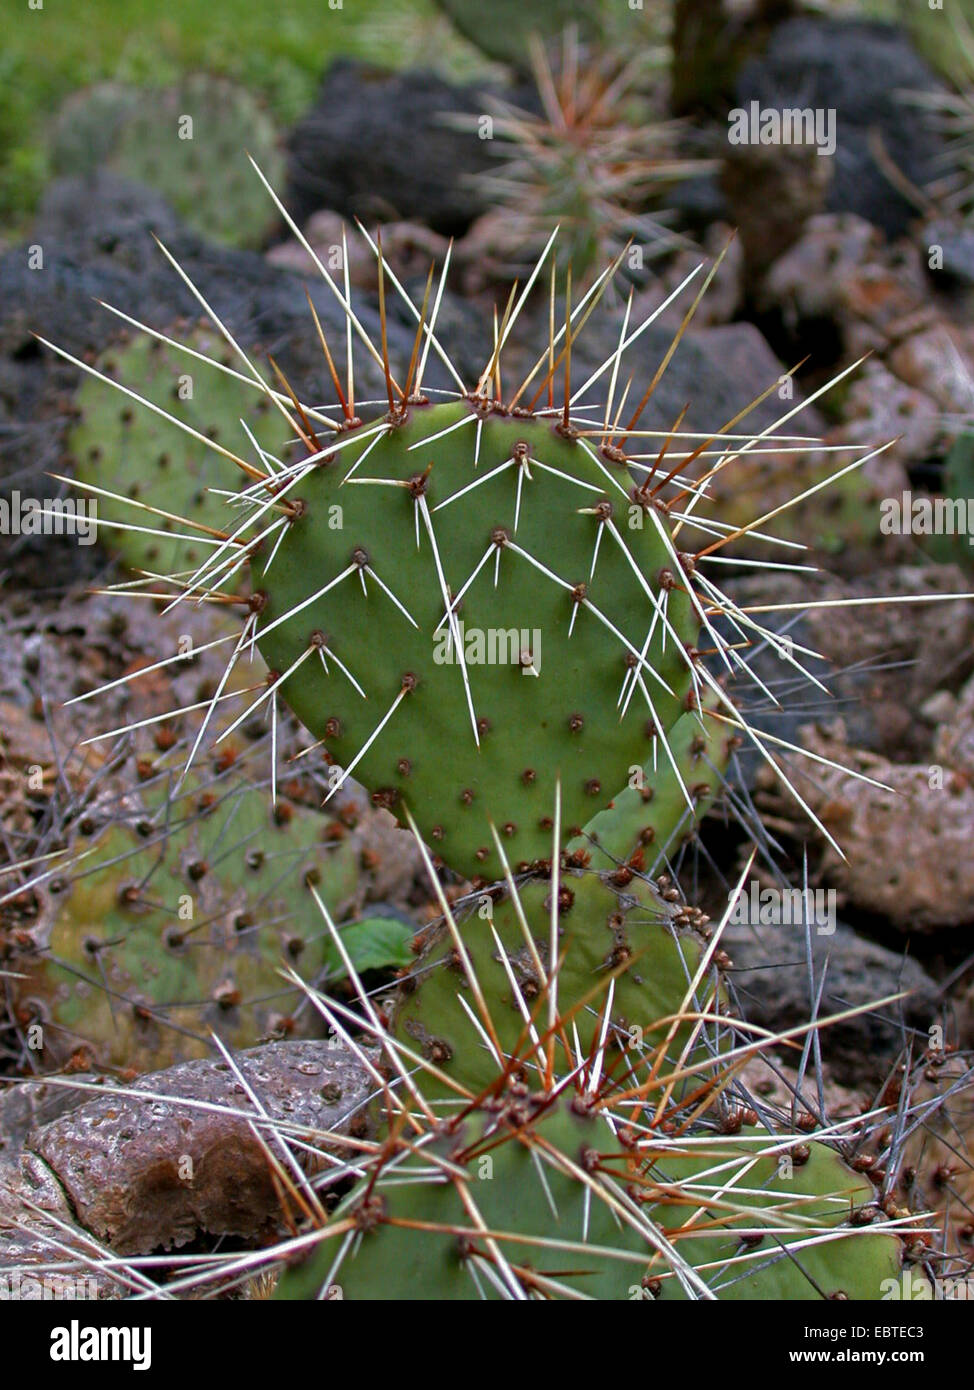 Tulip prickly pear, Brownspine prickly pear cactus, Purple-fruited prickly pear, Brown-spined prickly pear, New mexico prickly pear, Desert prickly pear (Opuntia phaeacantha ), stem Stock Photo